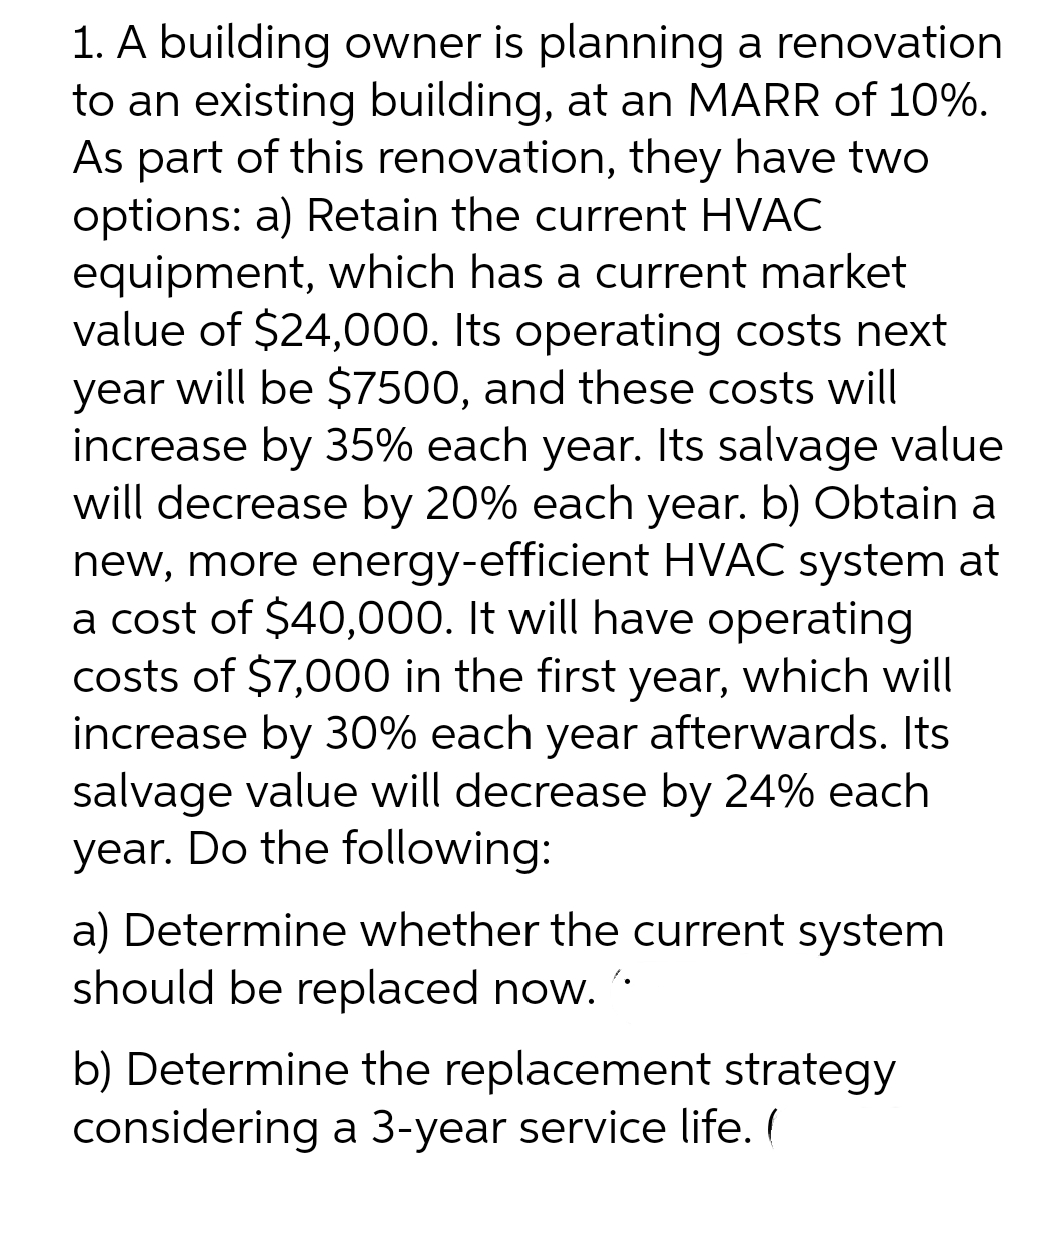 1. A building owner is planning a renovation
to an existing building, at an MARR of 10%.
As part of this renovation, they have two
options: a) Retain the current HVAC
equipment, which has a current market
value of $24,000. Its operating costs next
year will be $7500, and these costs will
increase by 35% each year. Its salvage value
will decrease by 20% each year. b) Obtain a
new, more energy-efficient HVAC system at
a cost of $40,000. It will have operating
costs of $7,000 in the first year, which will
increase by 30% each year afterwards. Its
salvage value will decrease by 24% each
year. Do the following:
a) Determine whether the current system
should be replaced now.
b) Determine the replacement strategy
considering a 3-year service life. (
